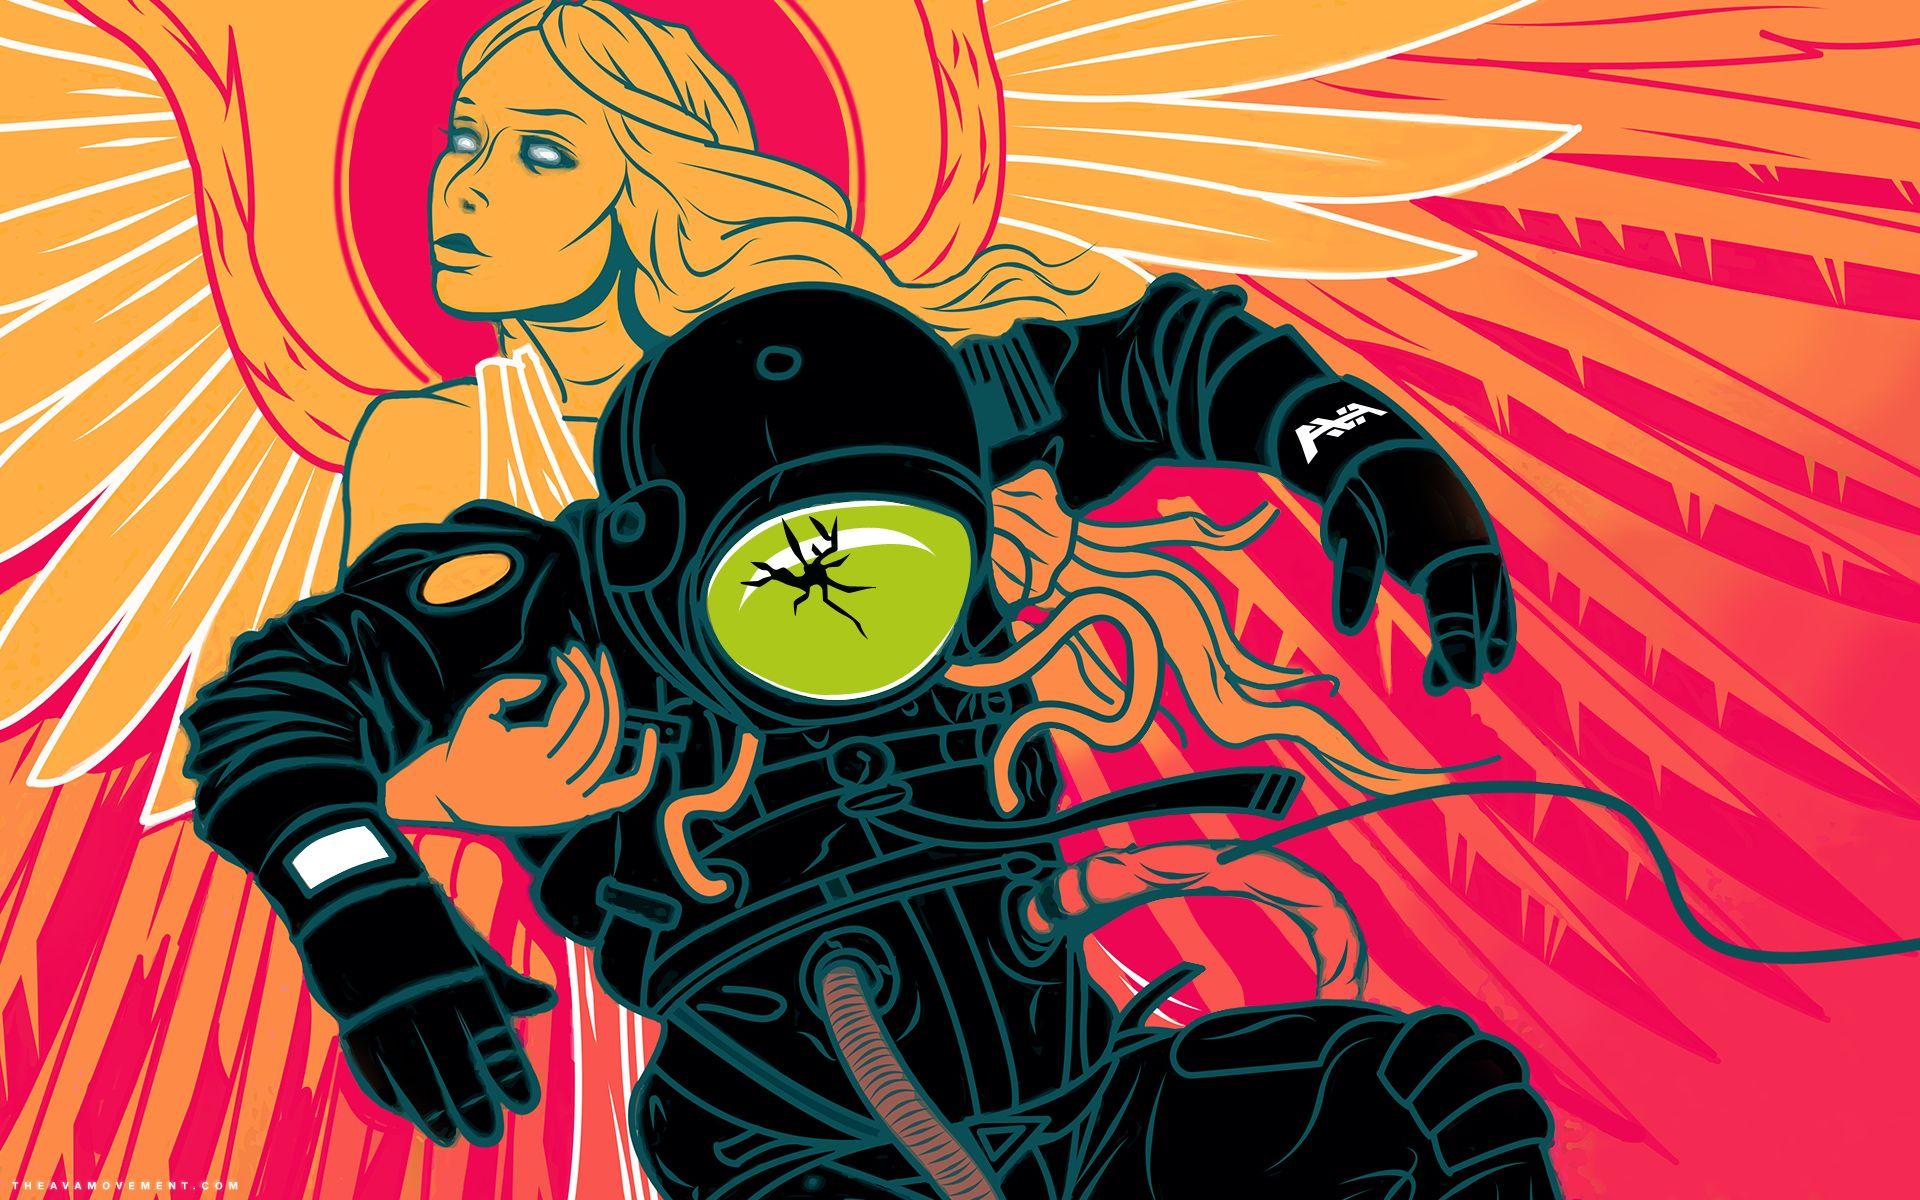 Angels And Airwaves Music Entertainment Posters Illustrations Sci